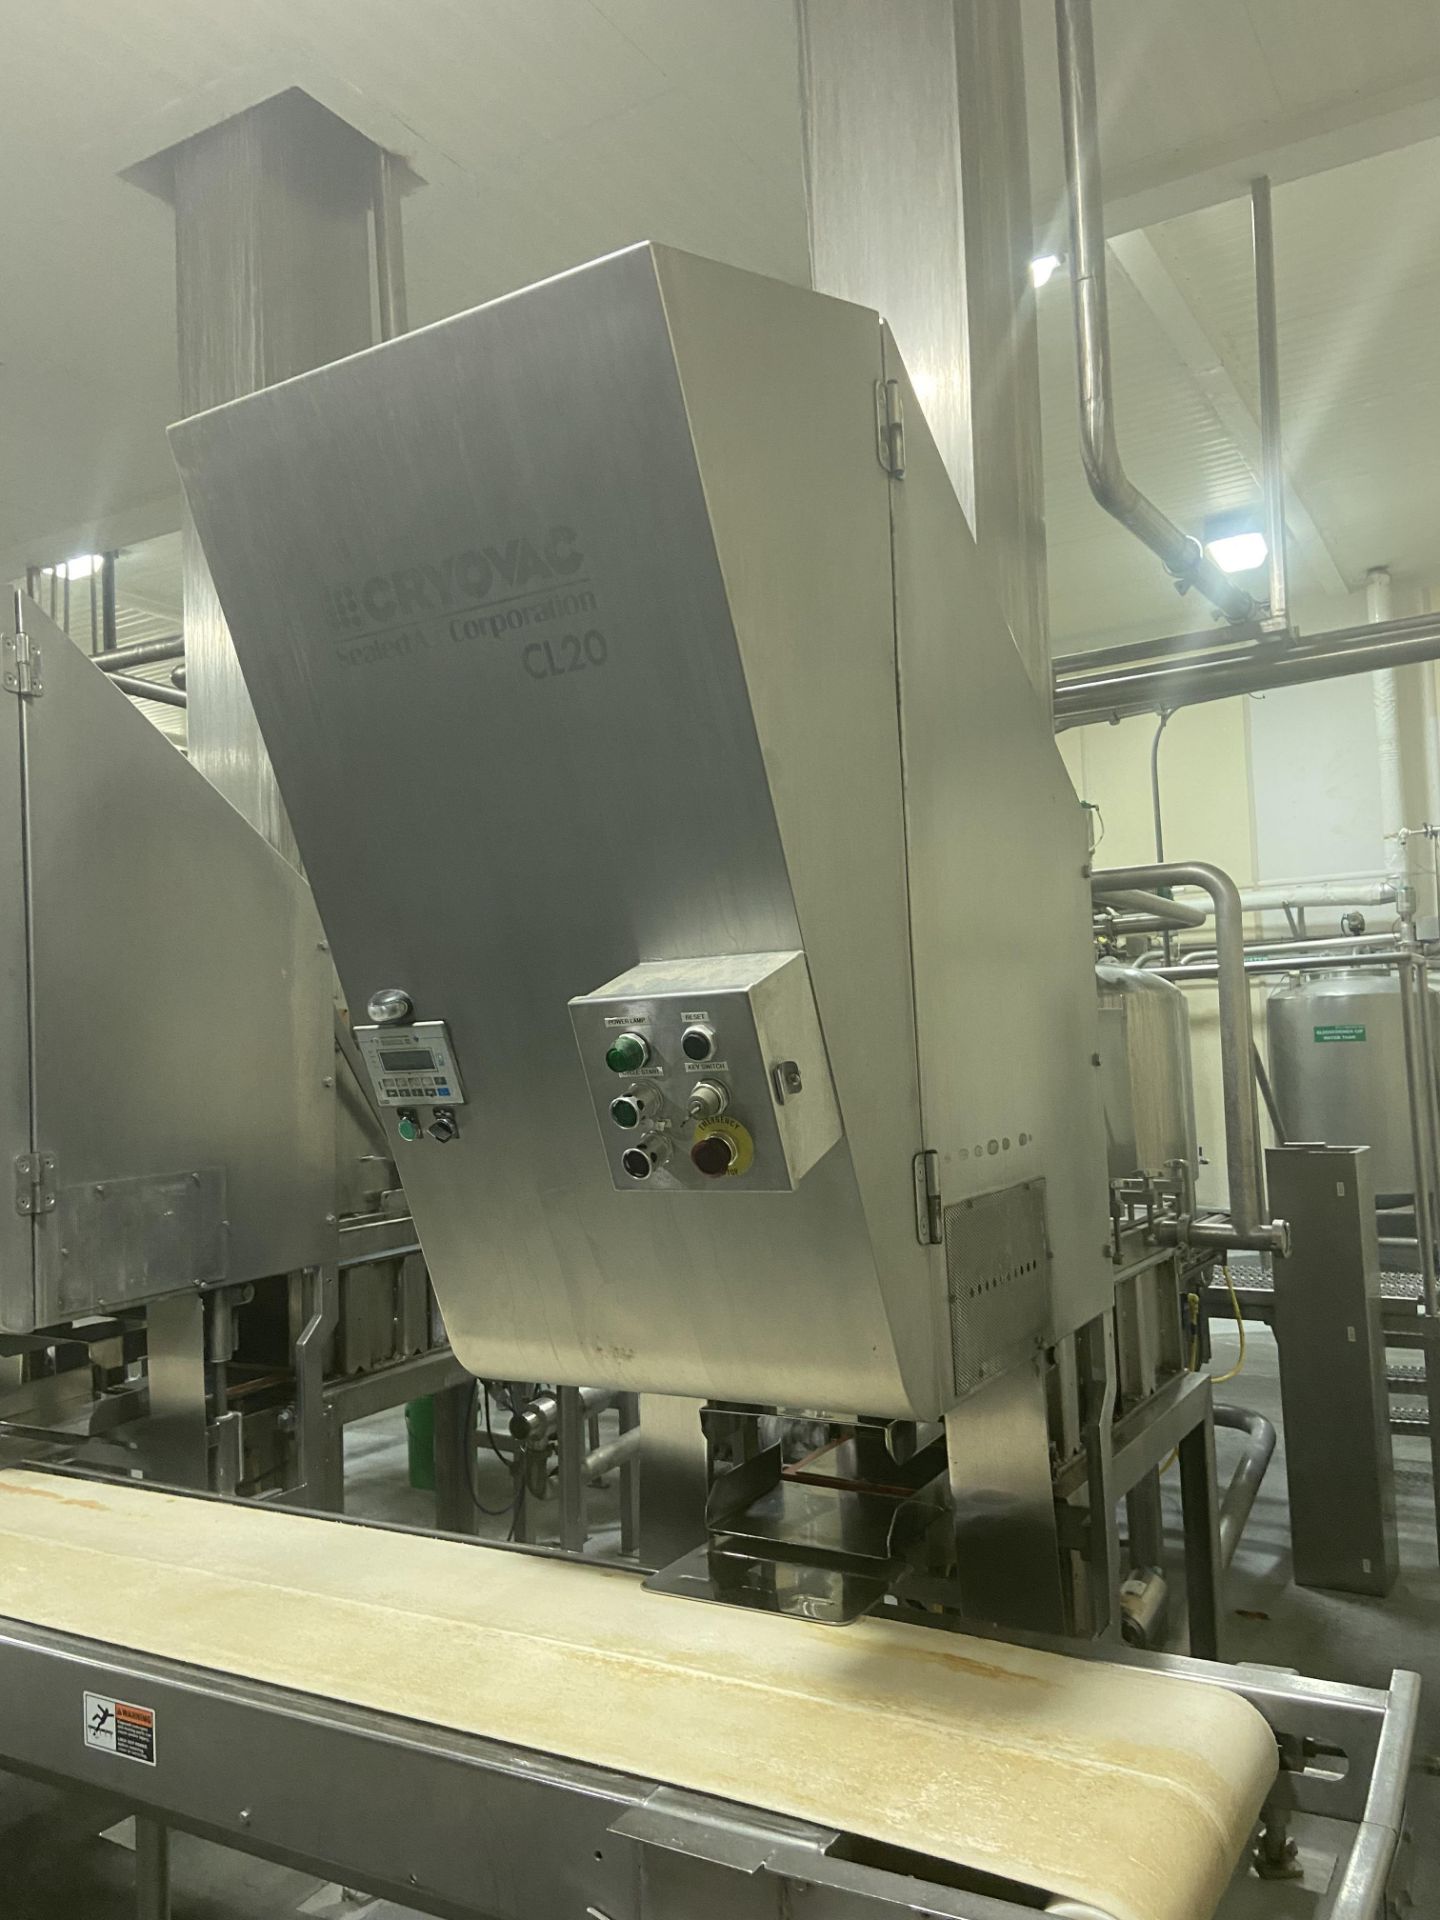 Stoelting (Relco)S/S Cheese Blocker with Cyrovac CL20 Bagger, M/N C120, S/N 01102, with - Image 2 of 11